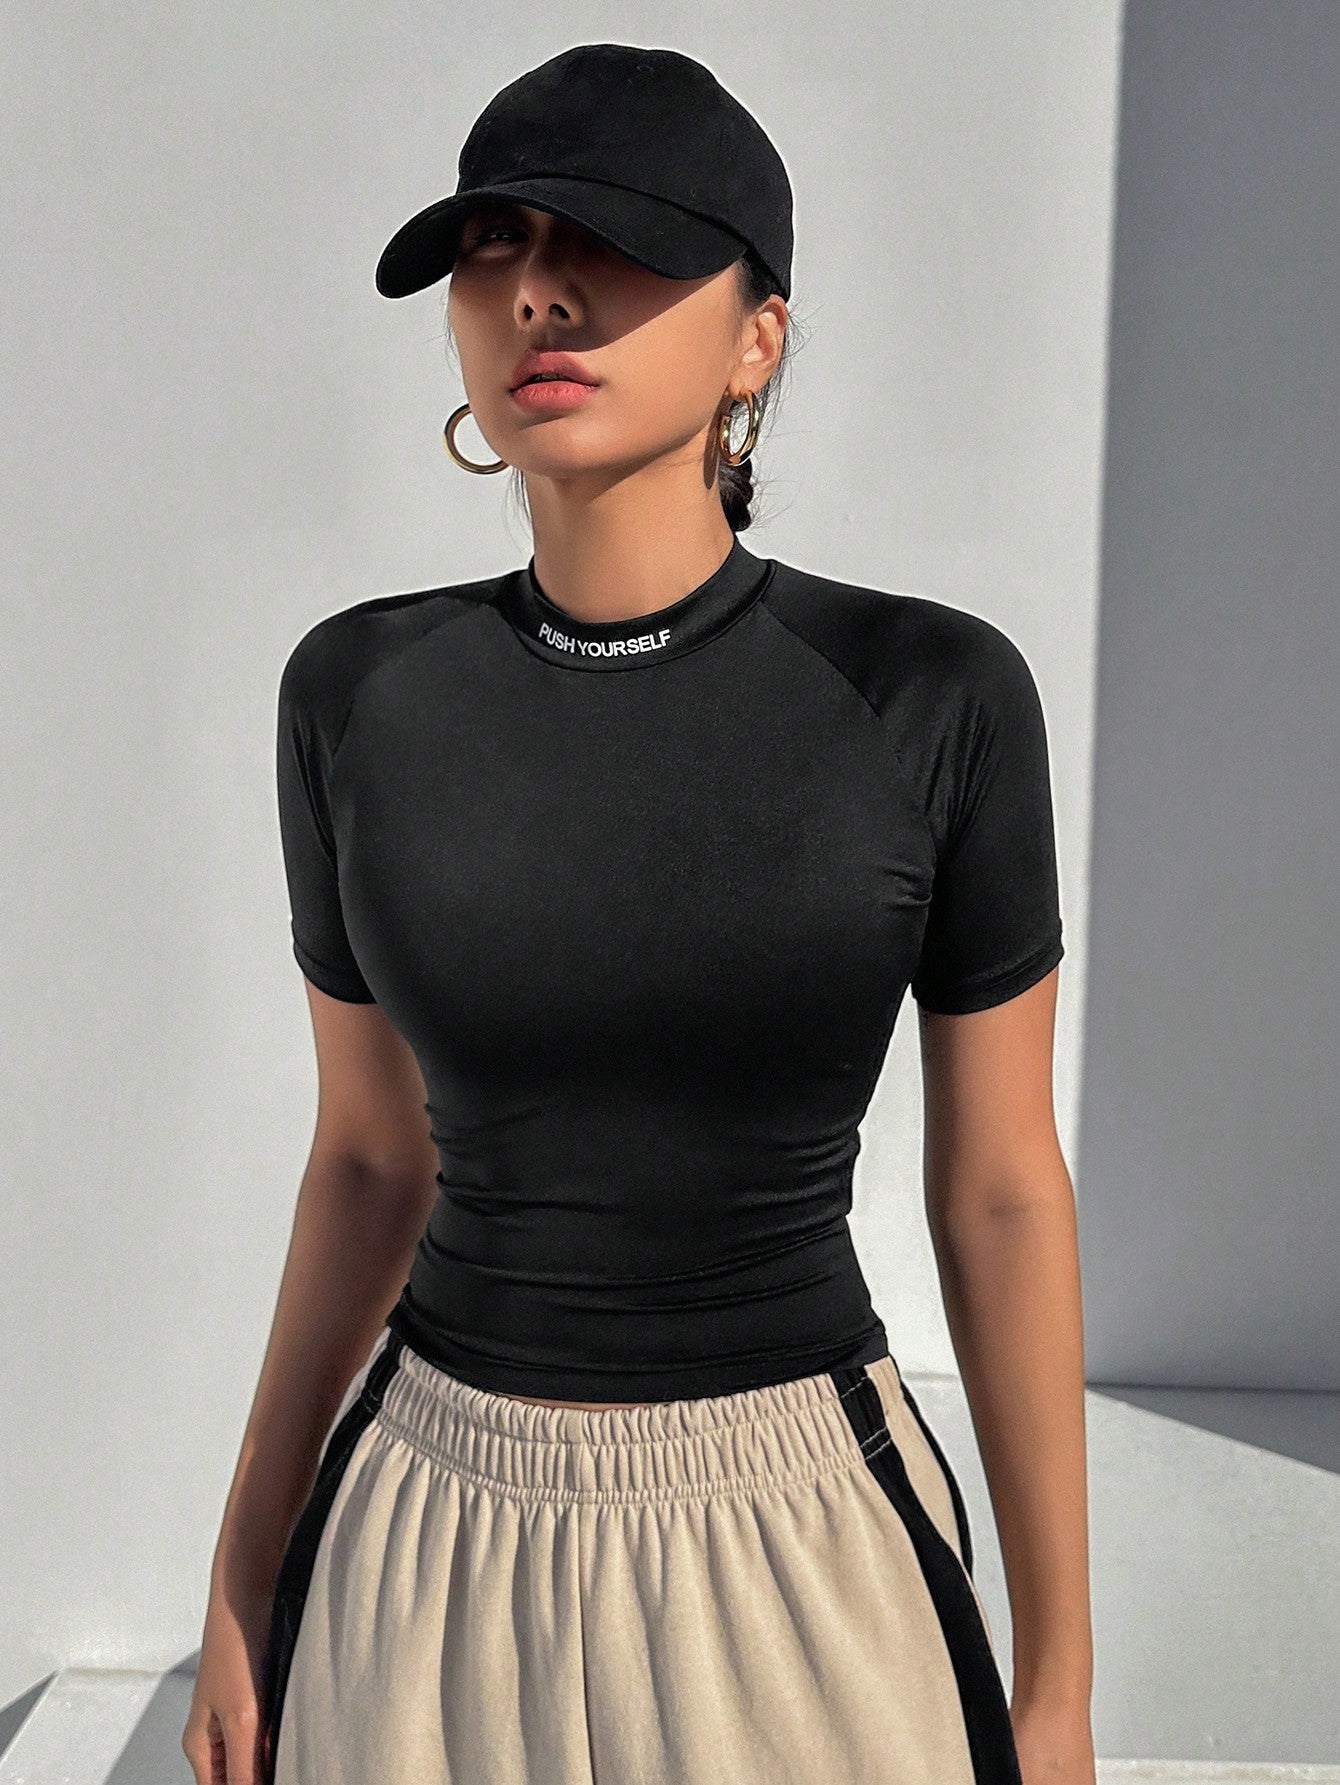 Women's Half Turtleneck Tight Short Sleeve T-Shirt With Letter Print And Cropped Hem